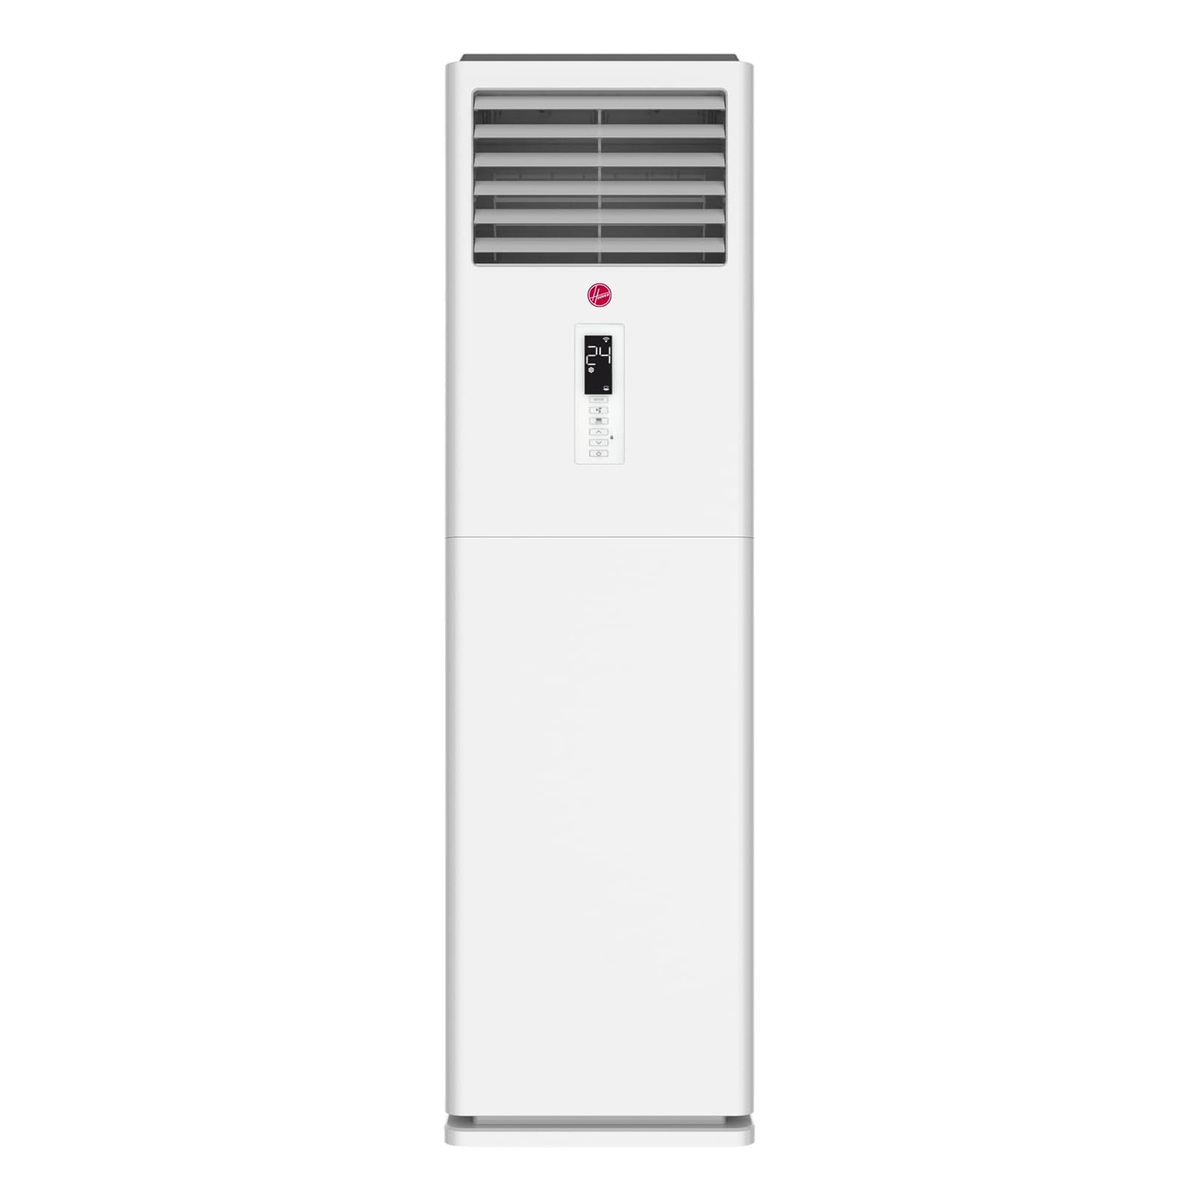 Hoover 4 Ton Floor Standing Air Conditioner, White, HAF-SC48K